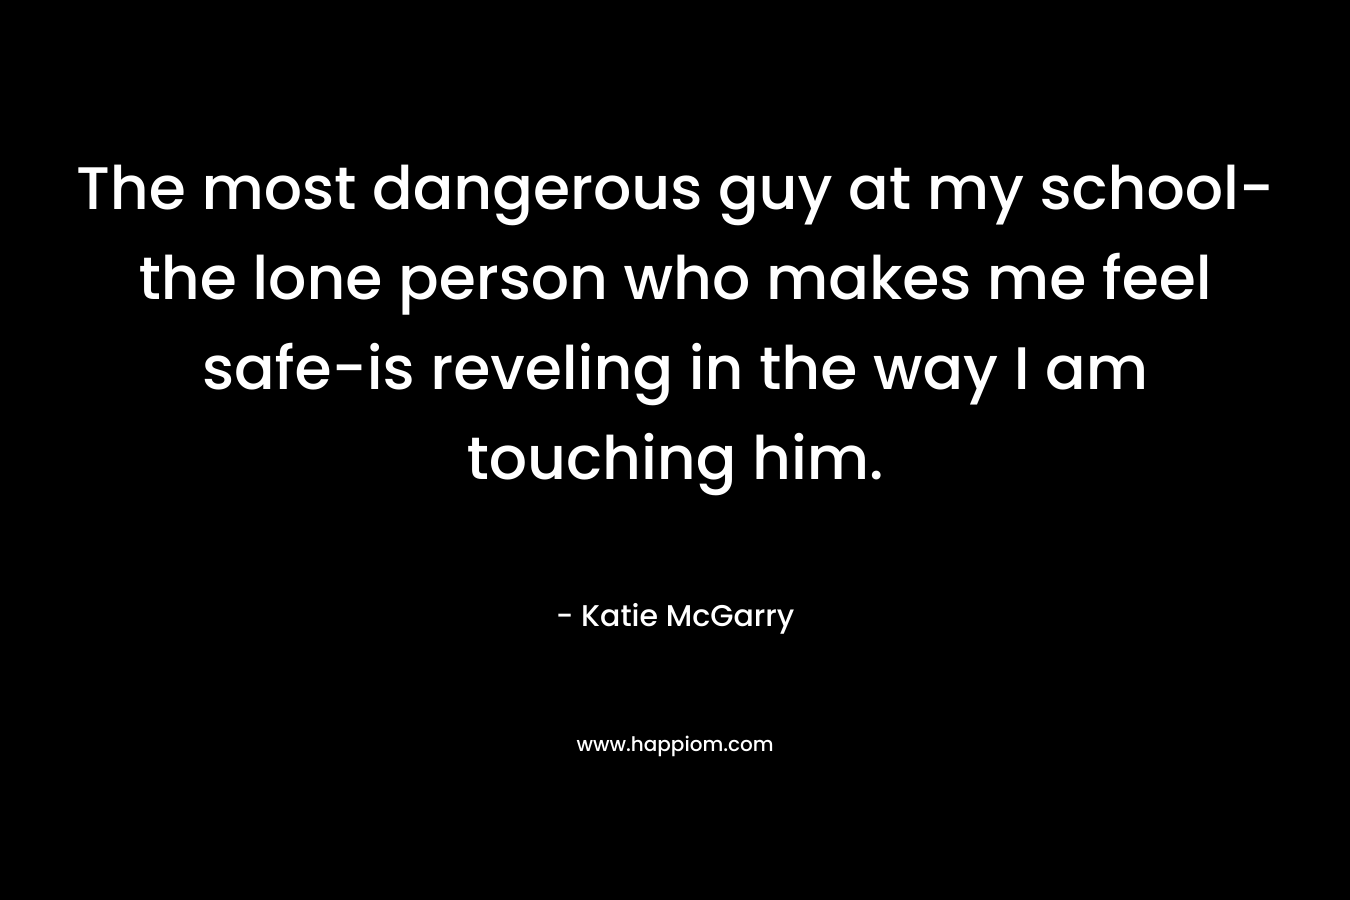 The most dangerous guy at my school-the lone person who makes me feel safe-is reveling in the way I am touching him.